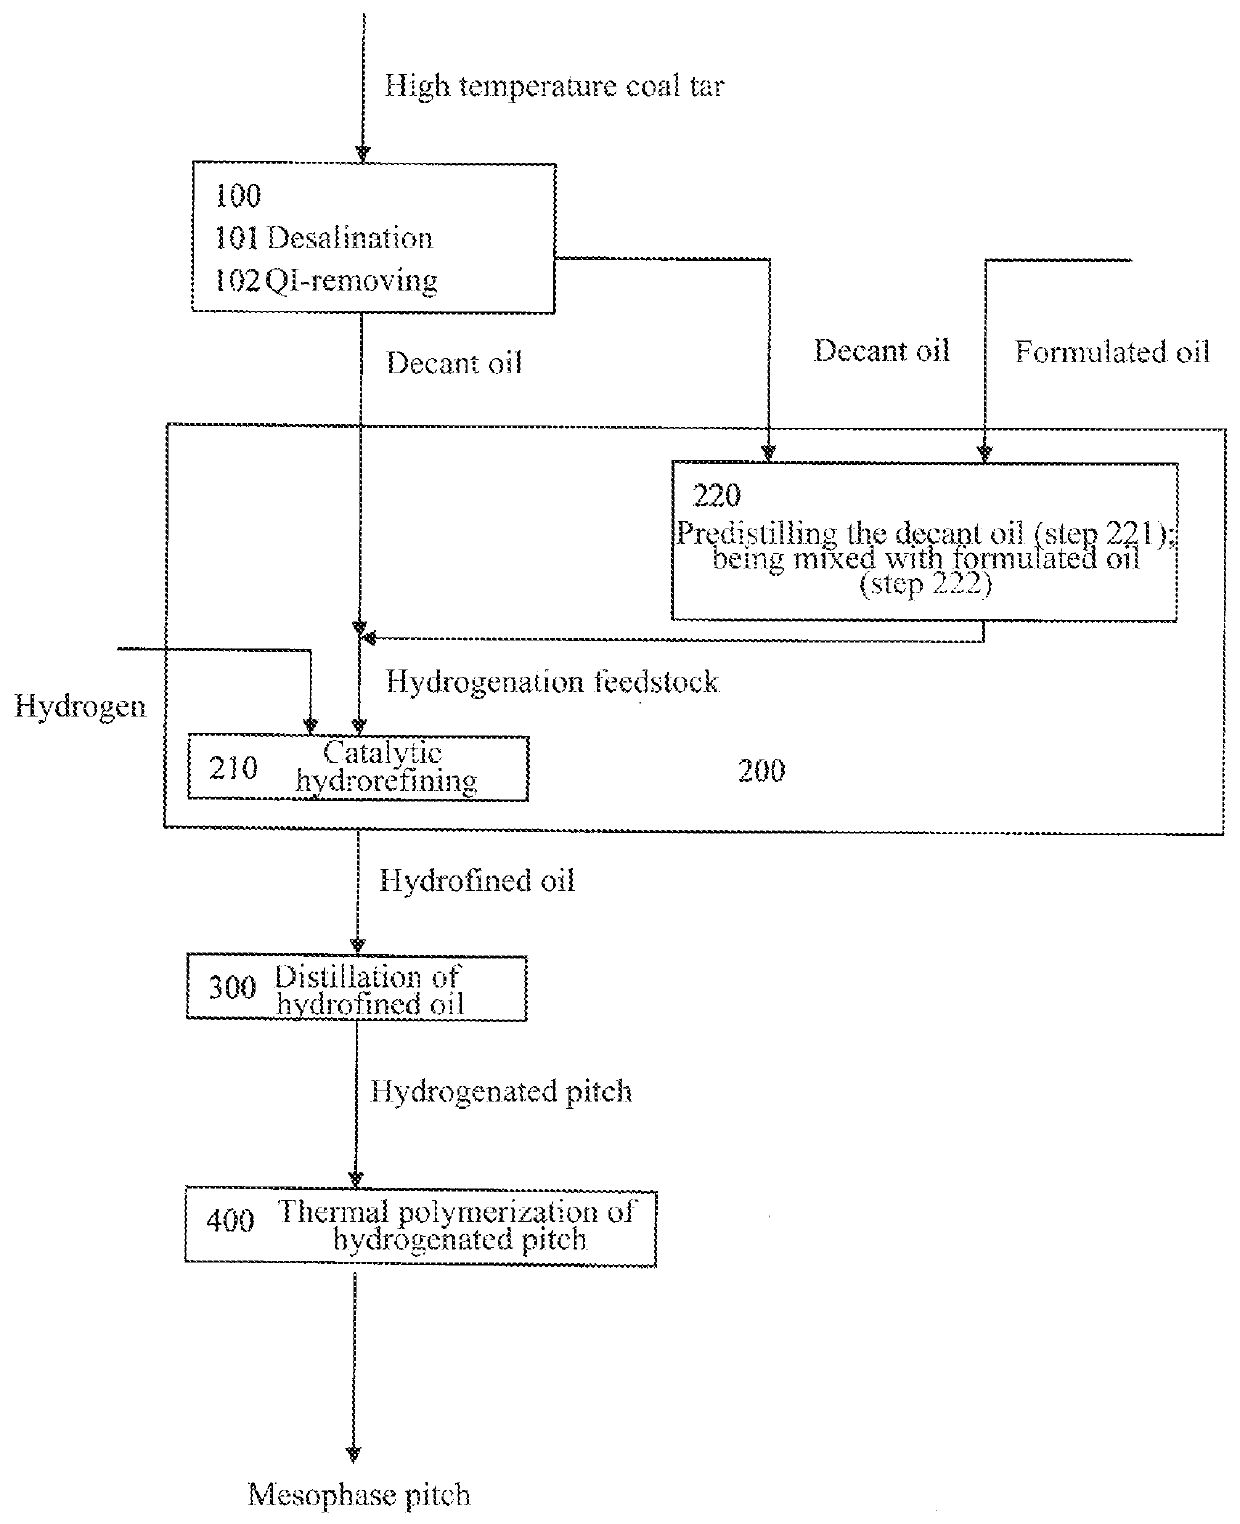 Process for producing mesophase pitch by hydrogenation of high-temperature coal tar